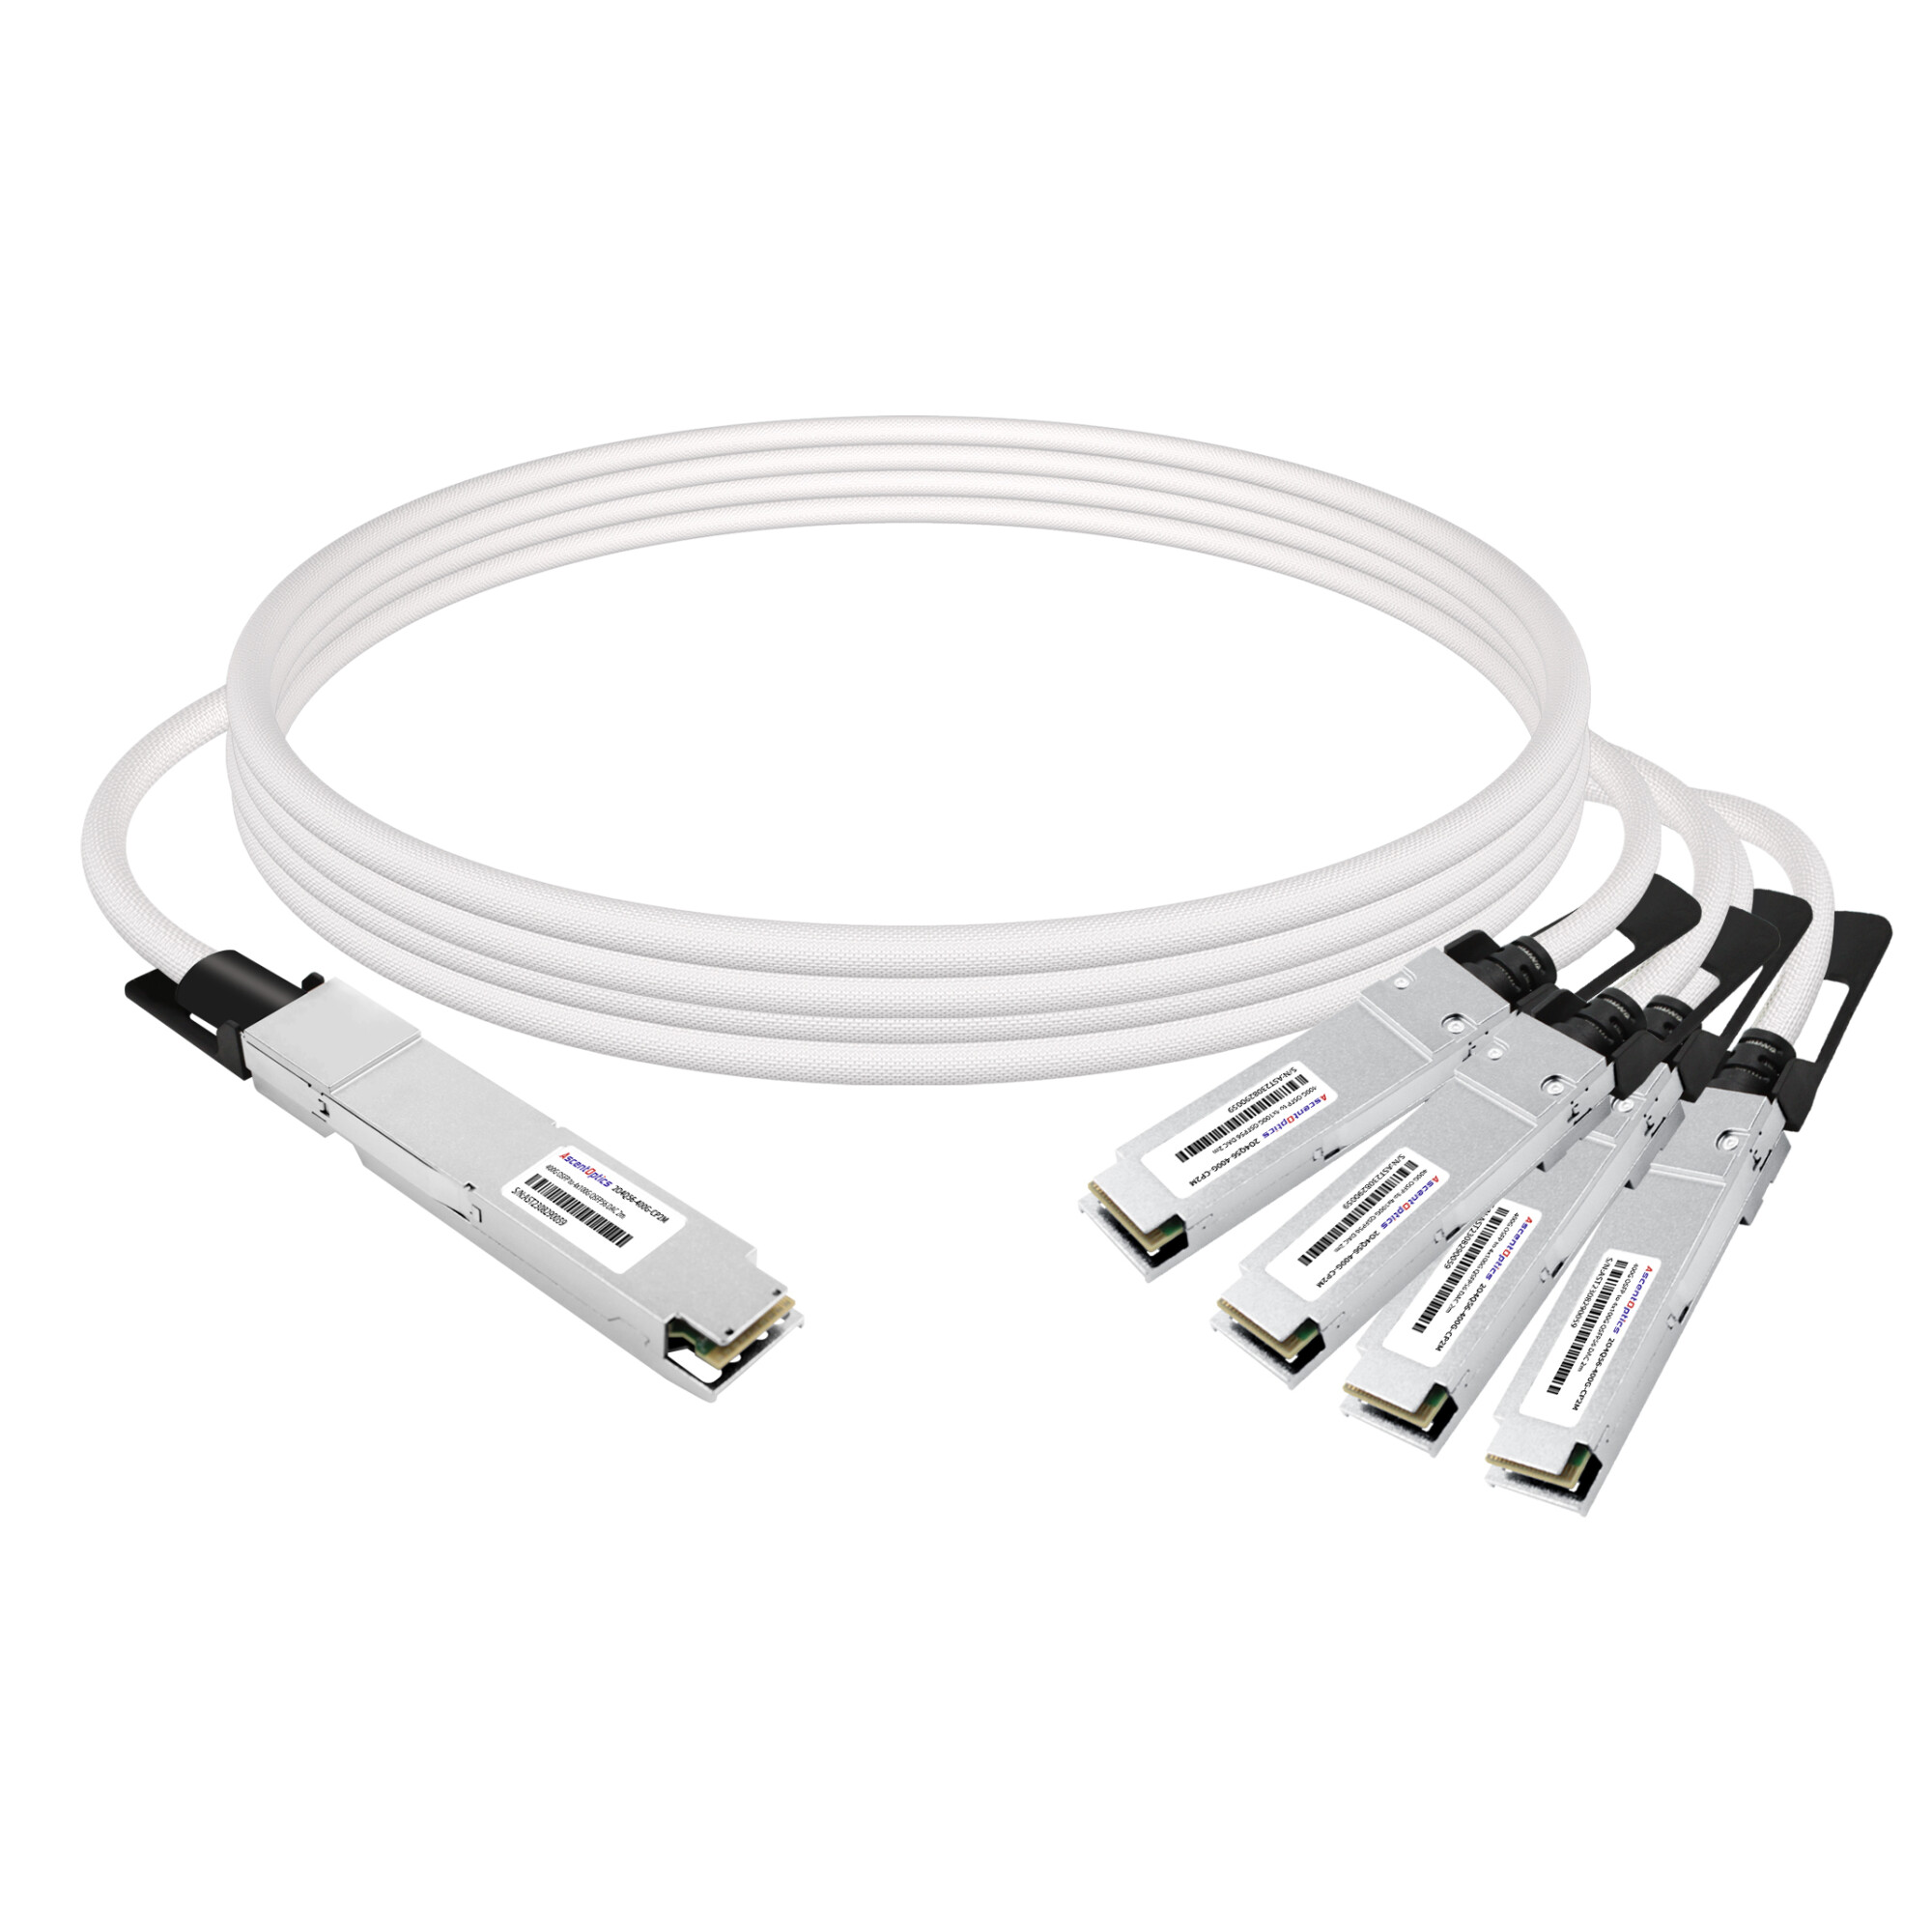 400G OSFP twin port to 4x 100G QSFP56 Copper Breakout Cable,2 Meter